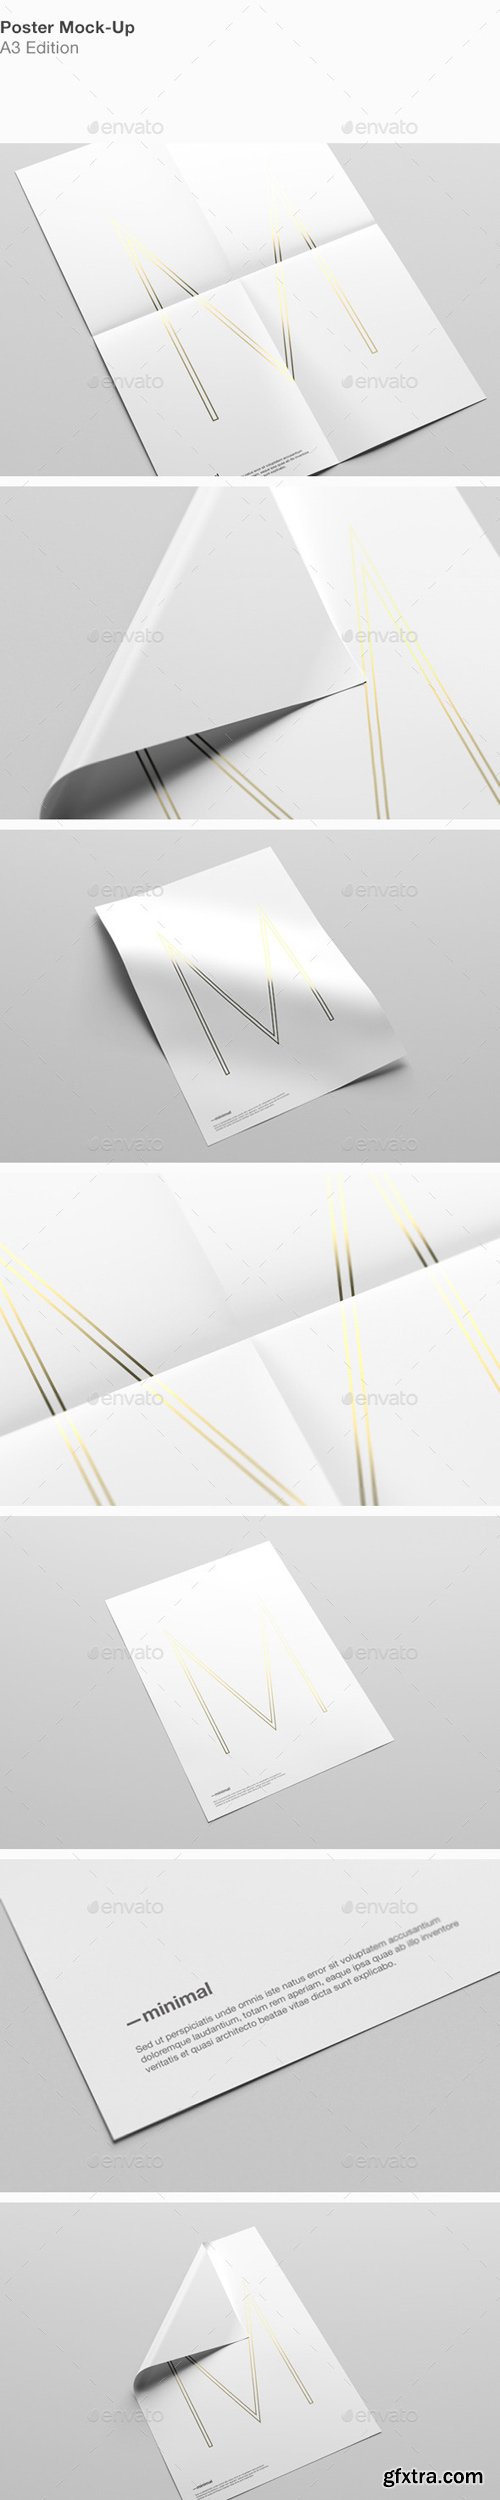 GraphicRiver - A3 Poster Mock-Up 12058884